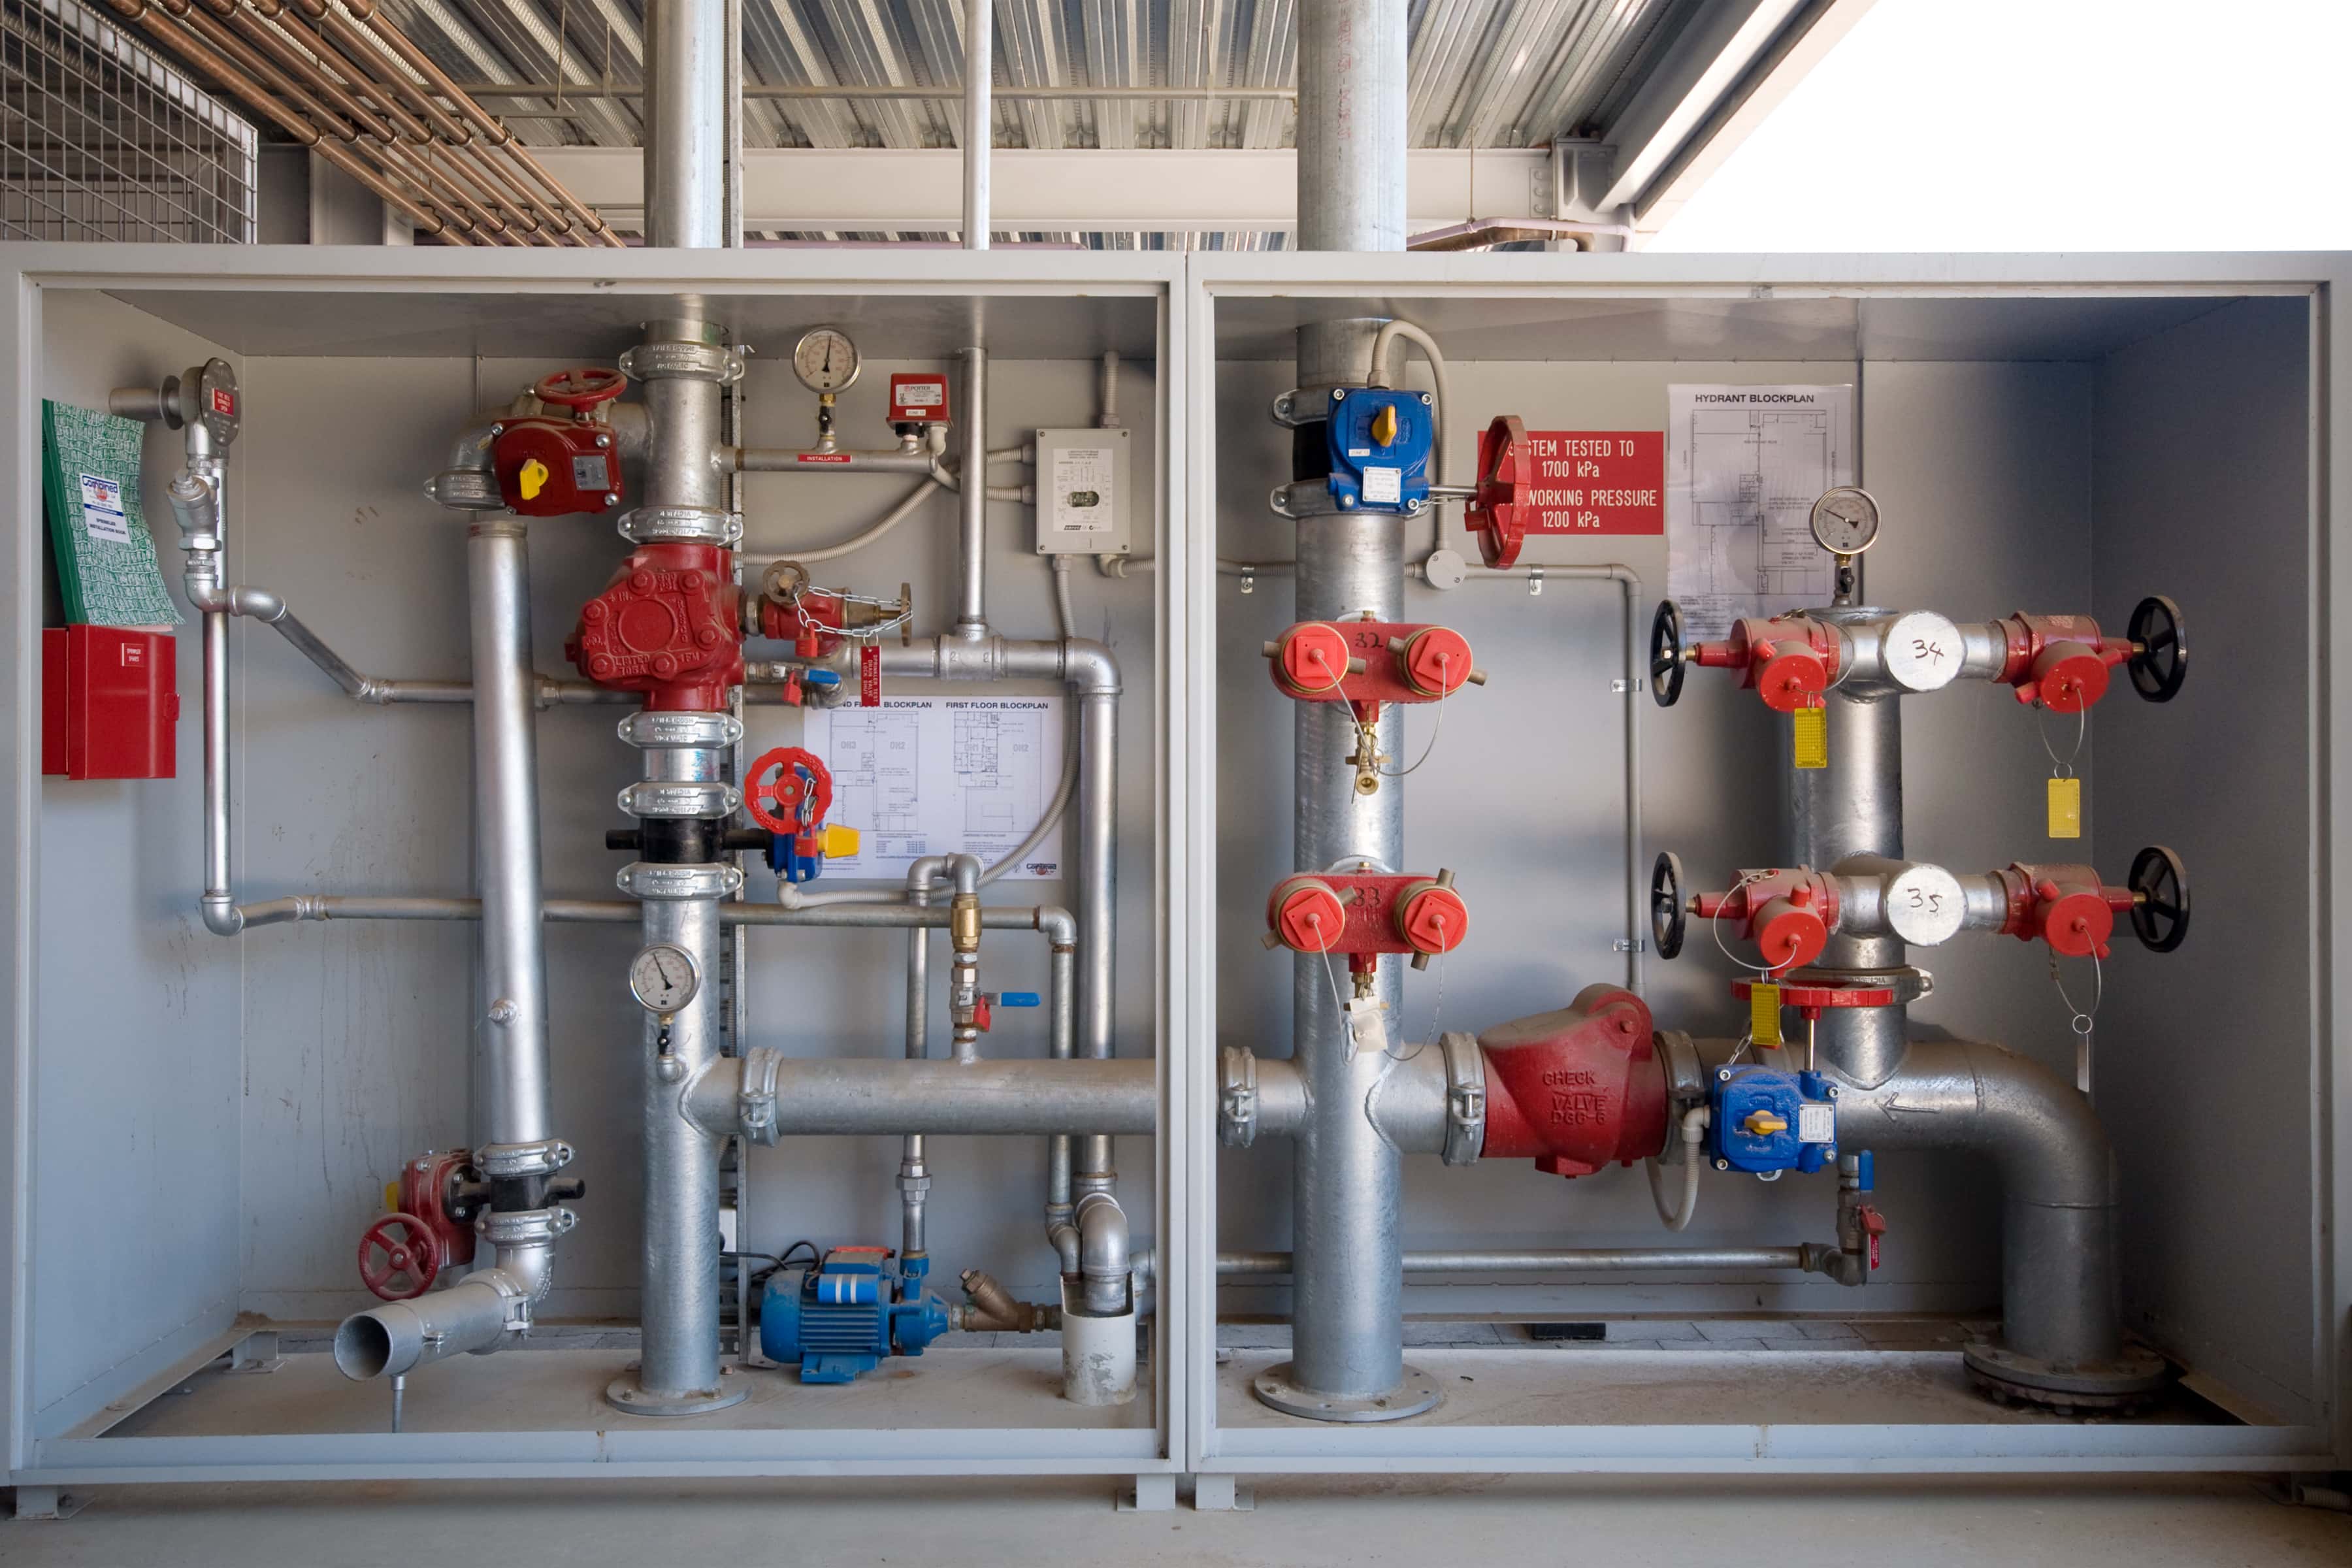 Combined Fire Systems - Mawson Lakes, AU, fire extinguishers
